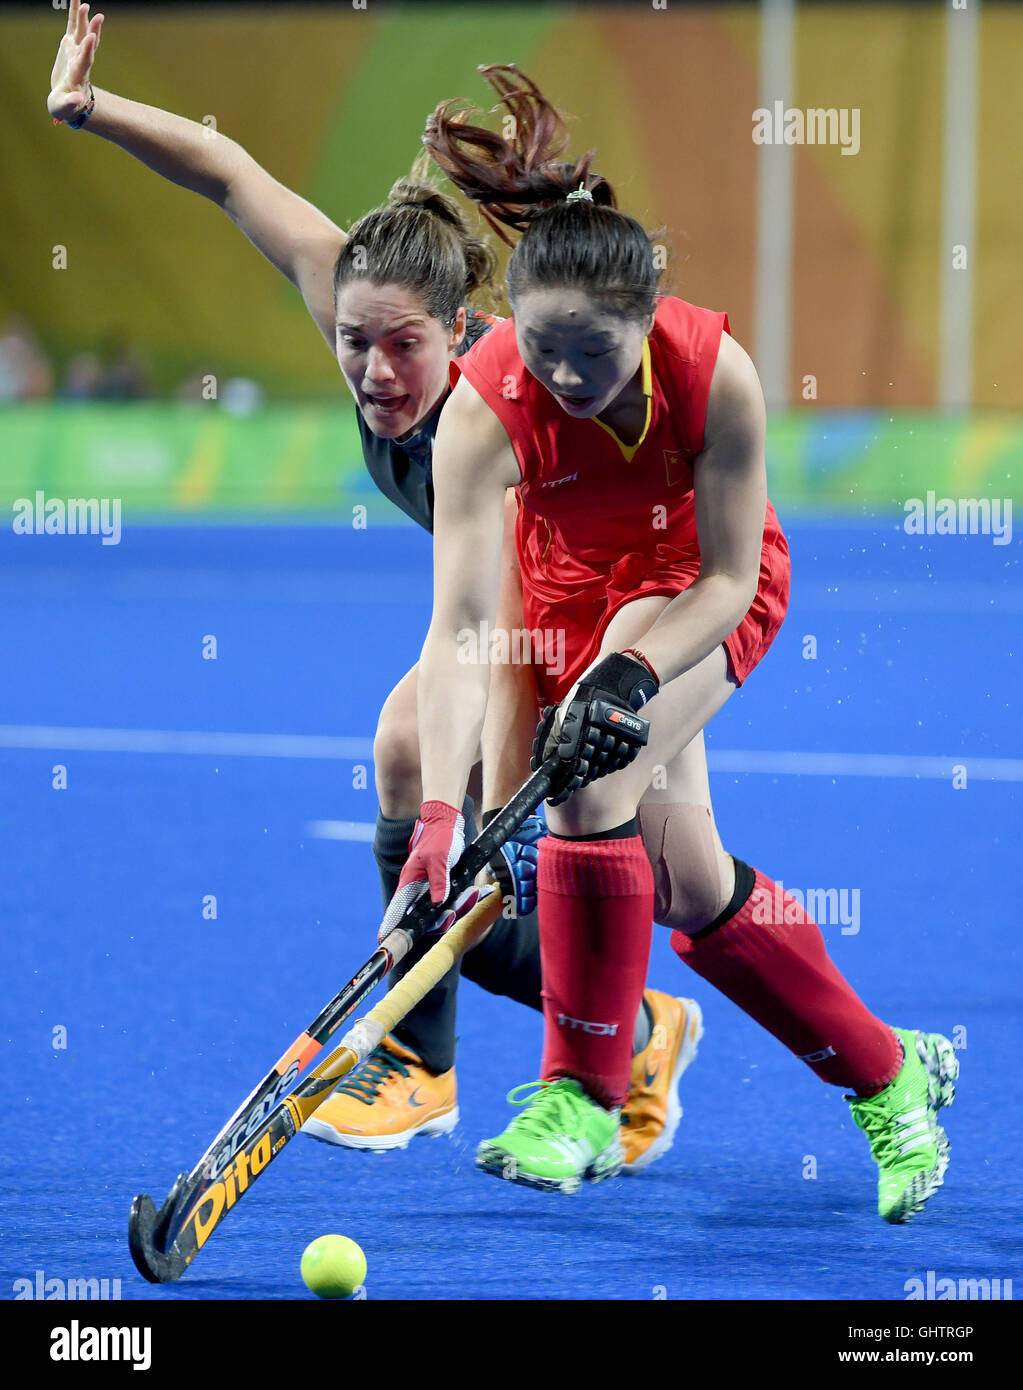 Rio De Janeiro, Brazil. 10th Aug, 2016. Peng Yang (R) of China competes during the women's hockey pool A match between China and Netherlands at the 2016 Rio Olympic Games in Rio de Janeiro, Brazil, on Aug. 10, 2016. Netherlands won China with 1:0. Credit:  Wang Yuguo/Xinhua/Alamy Live News Stock Photo